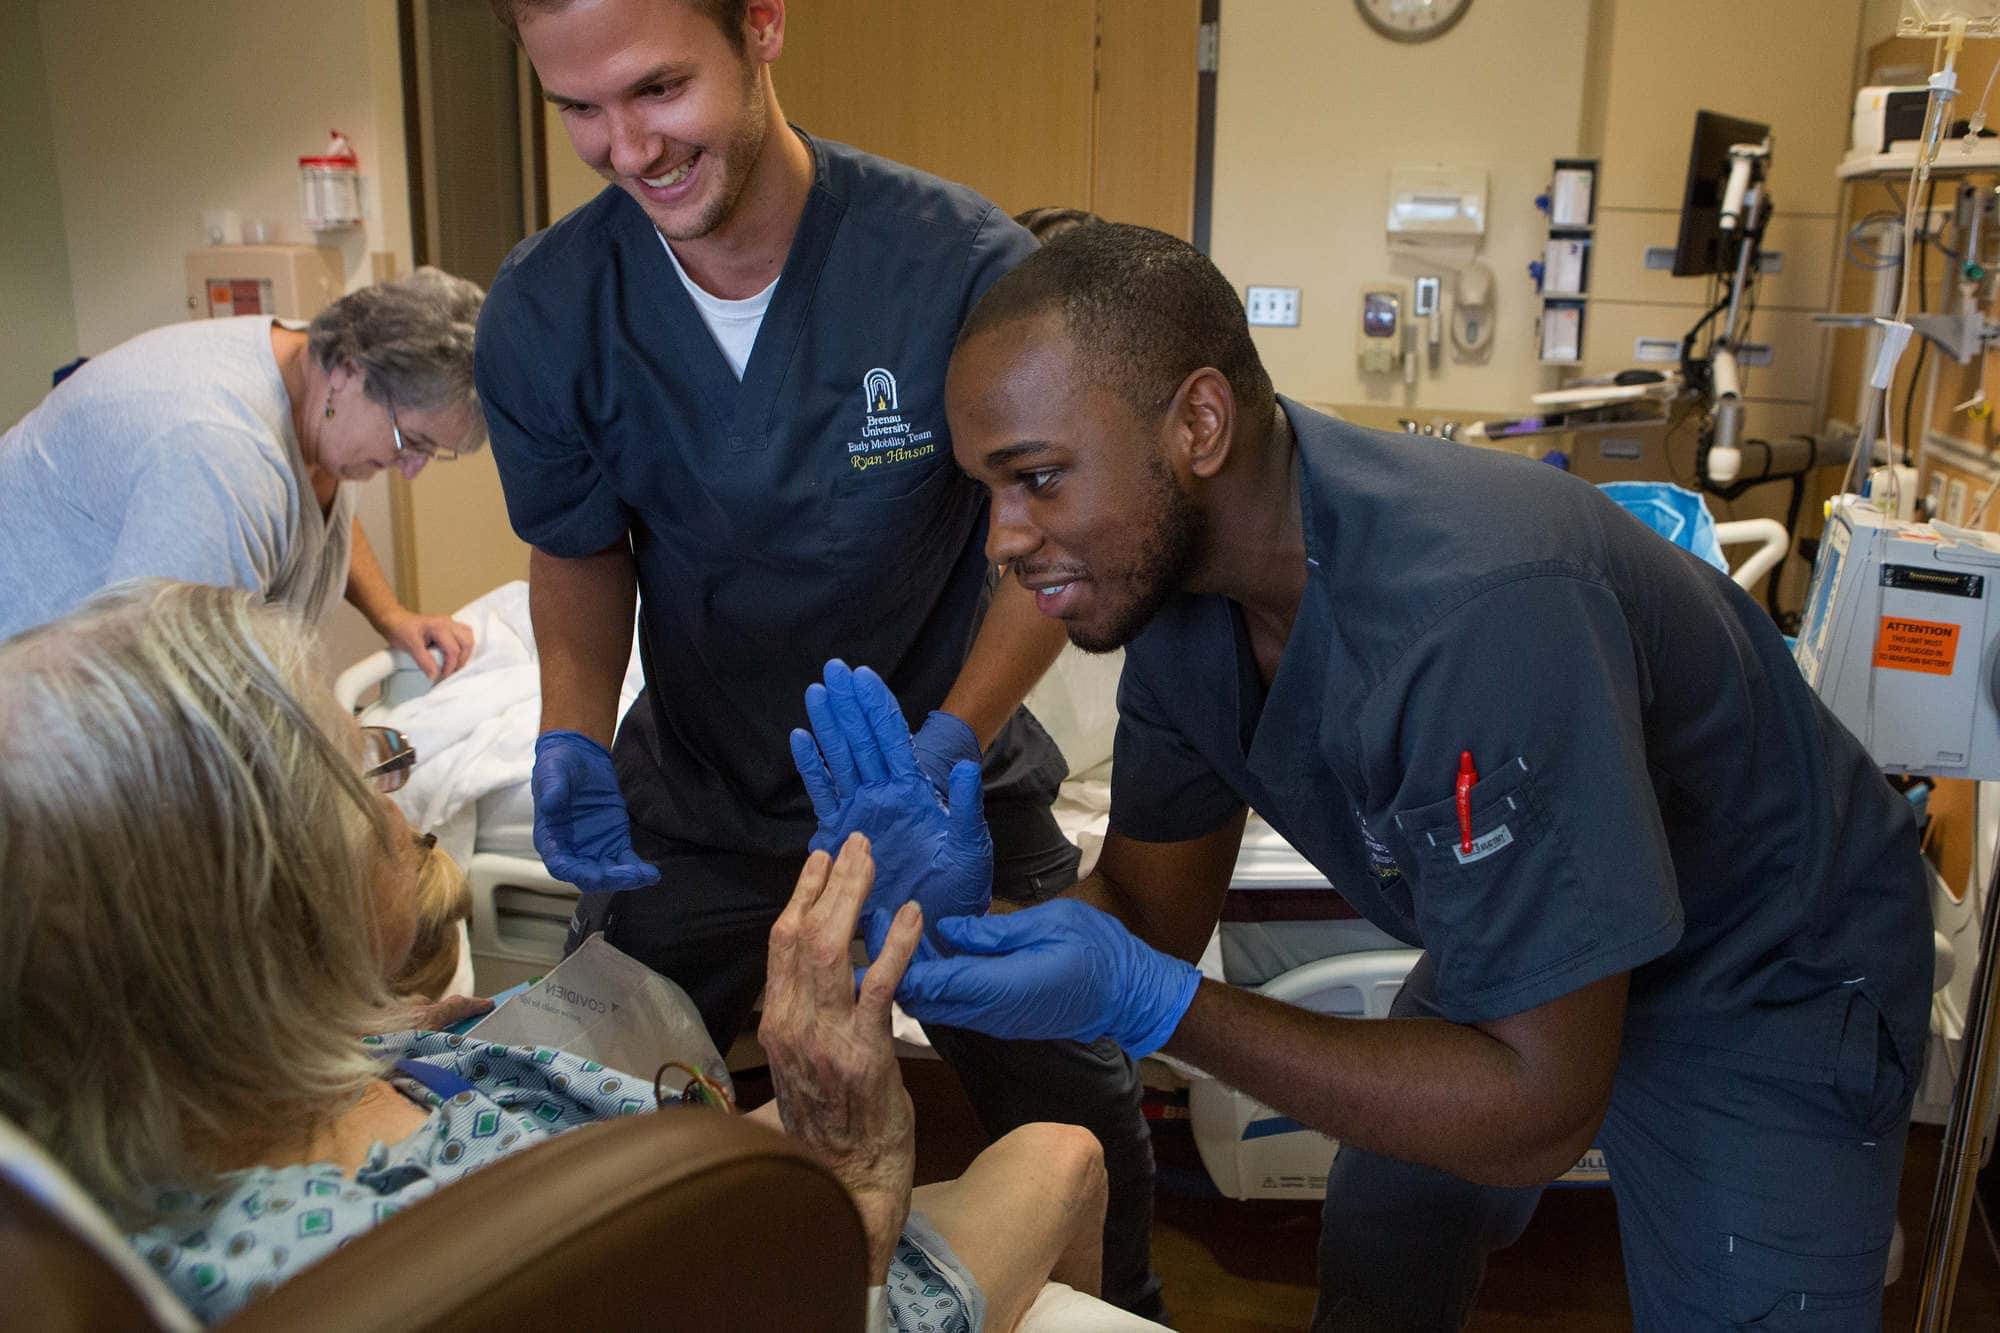 Two student physical therapists work with a patient